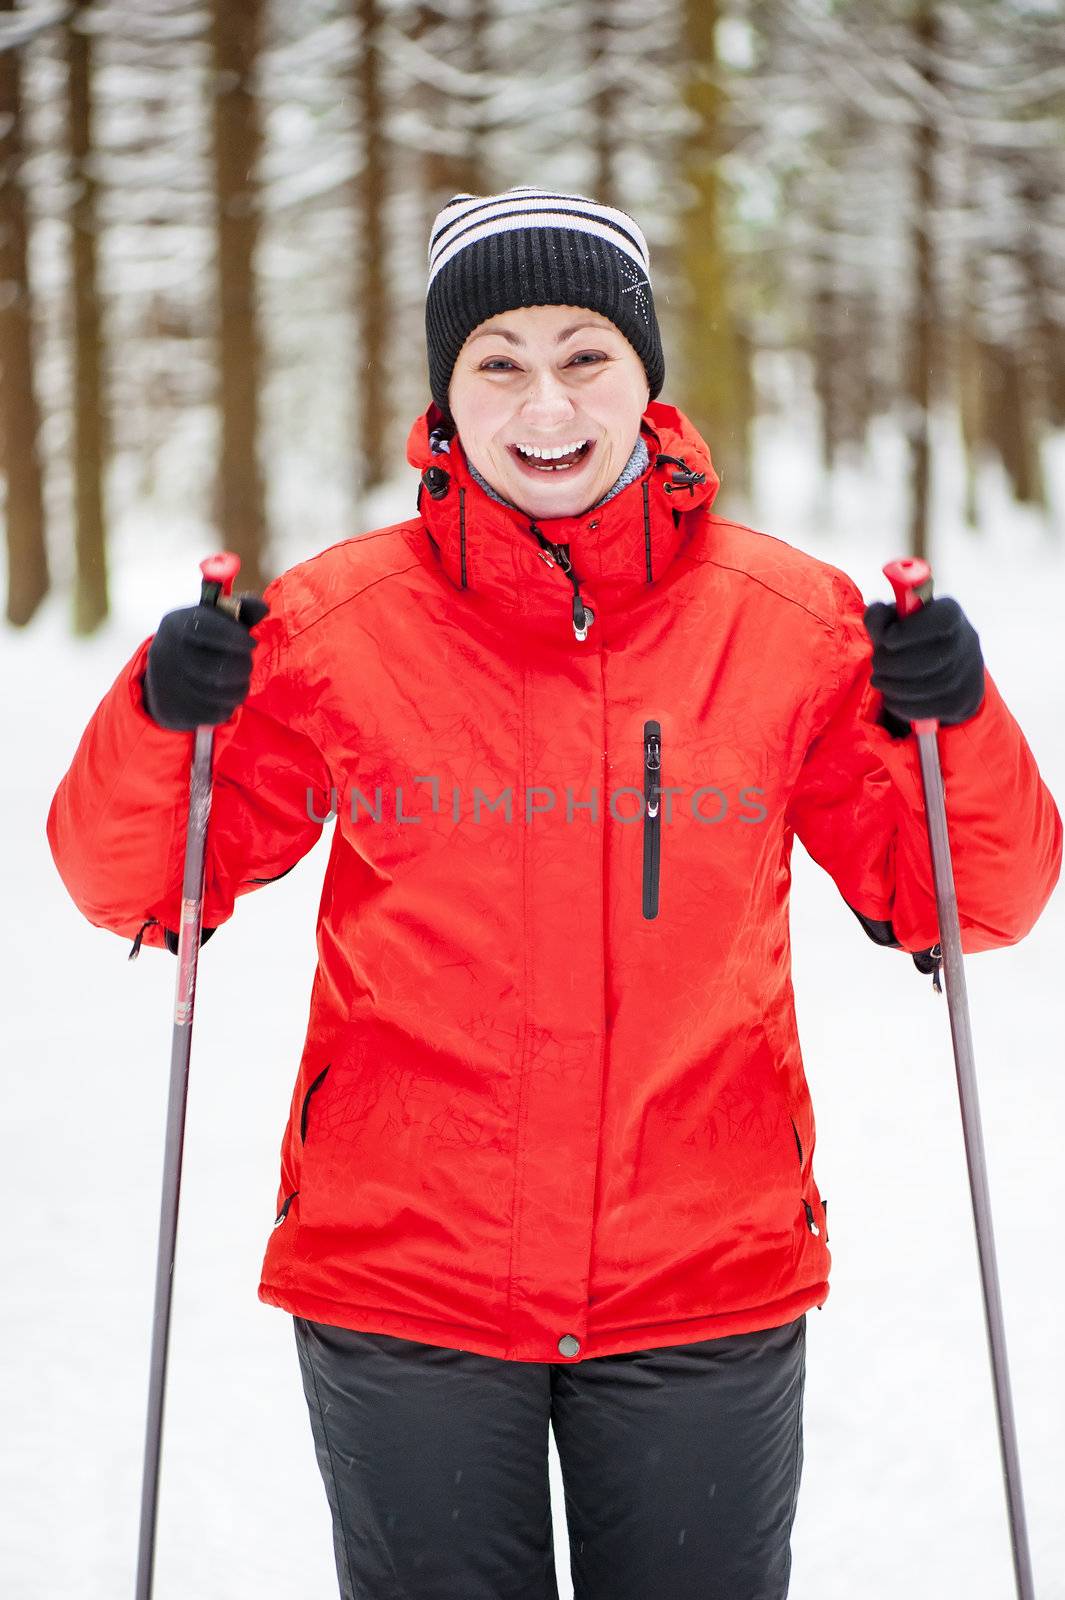 Happy girl posing on skis in the winter woods.